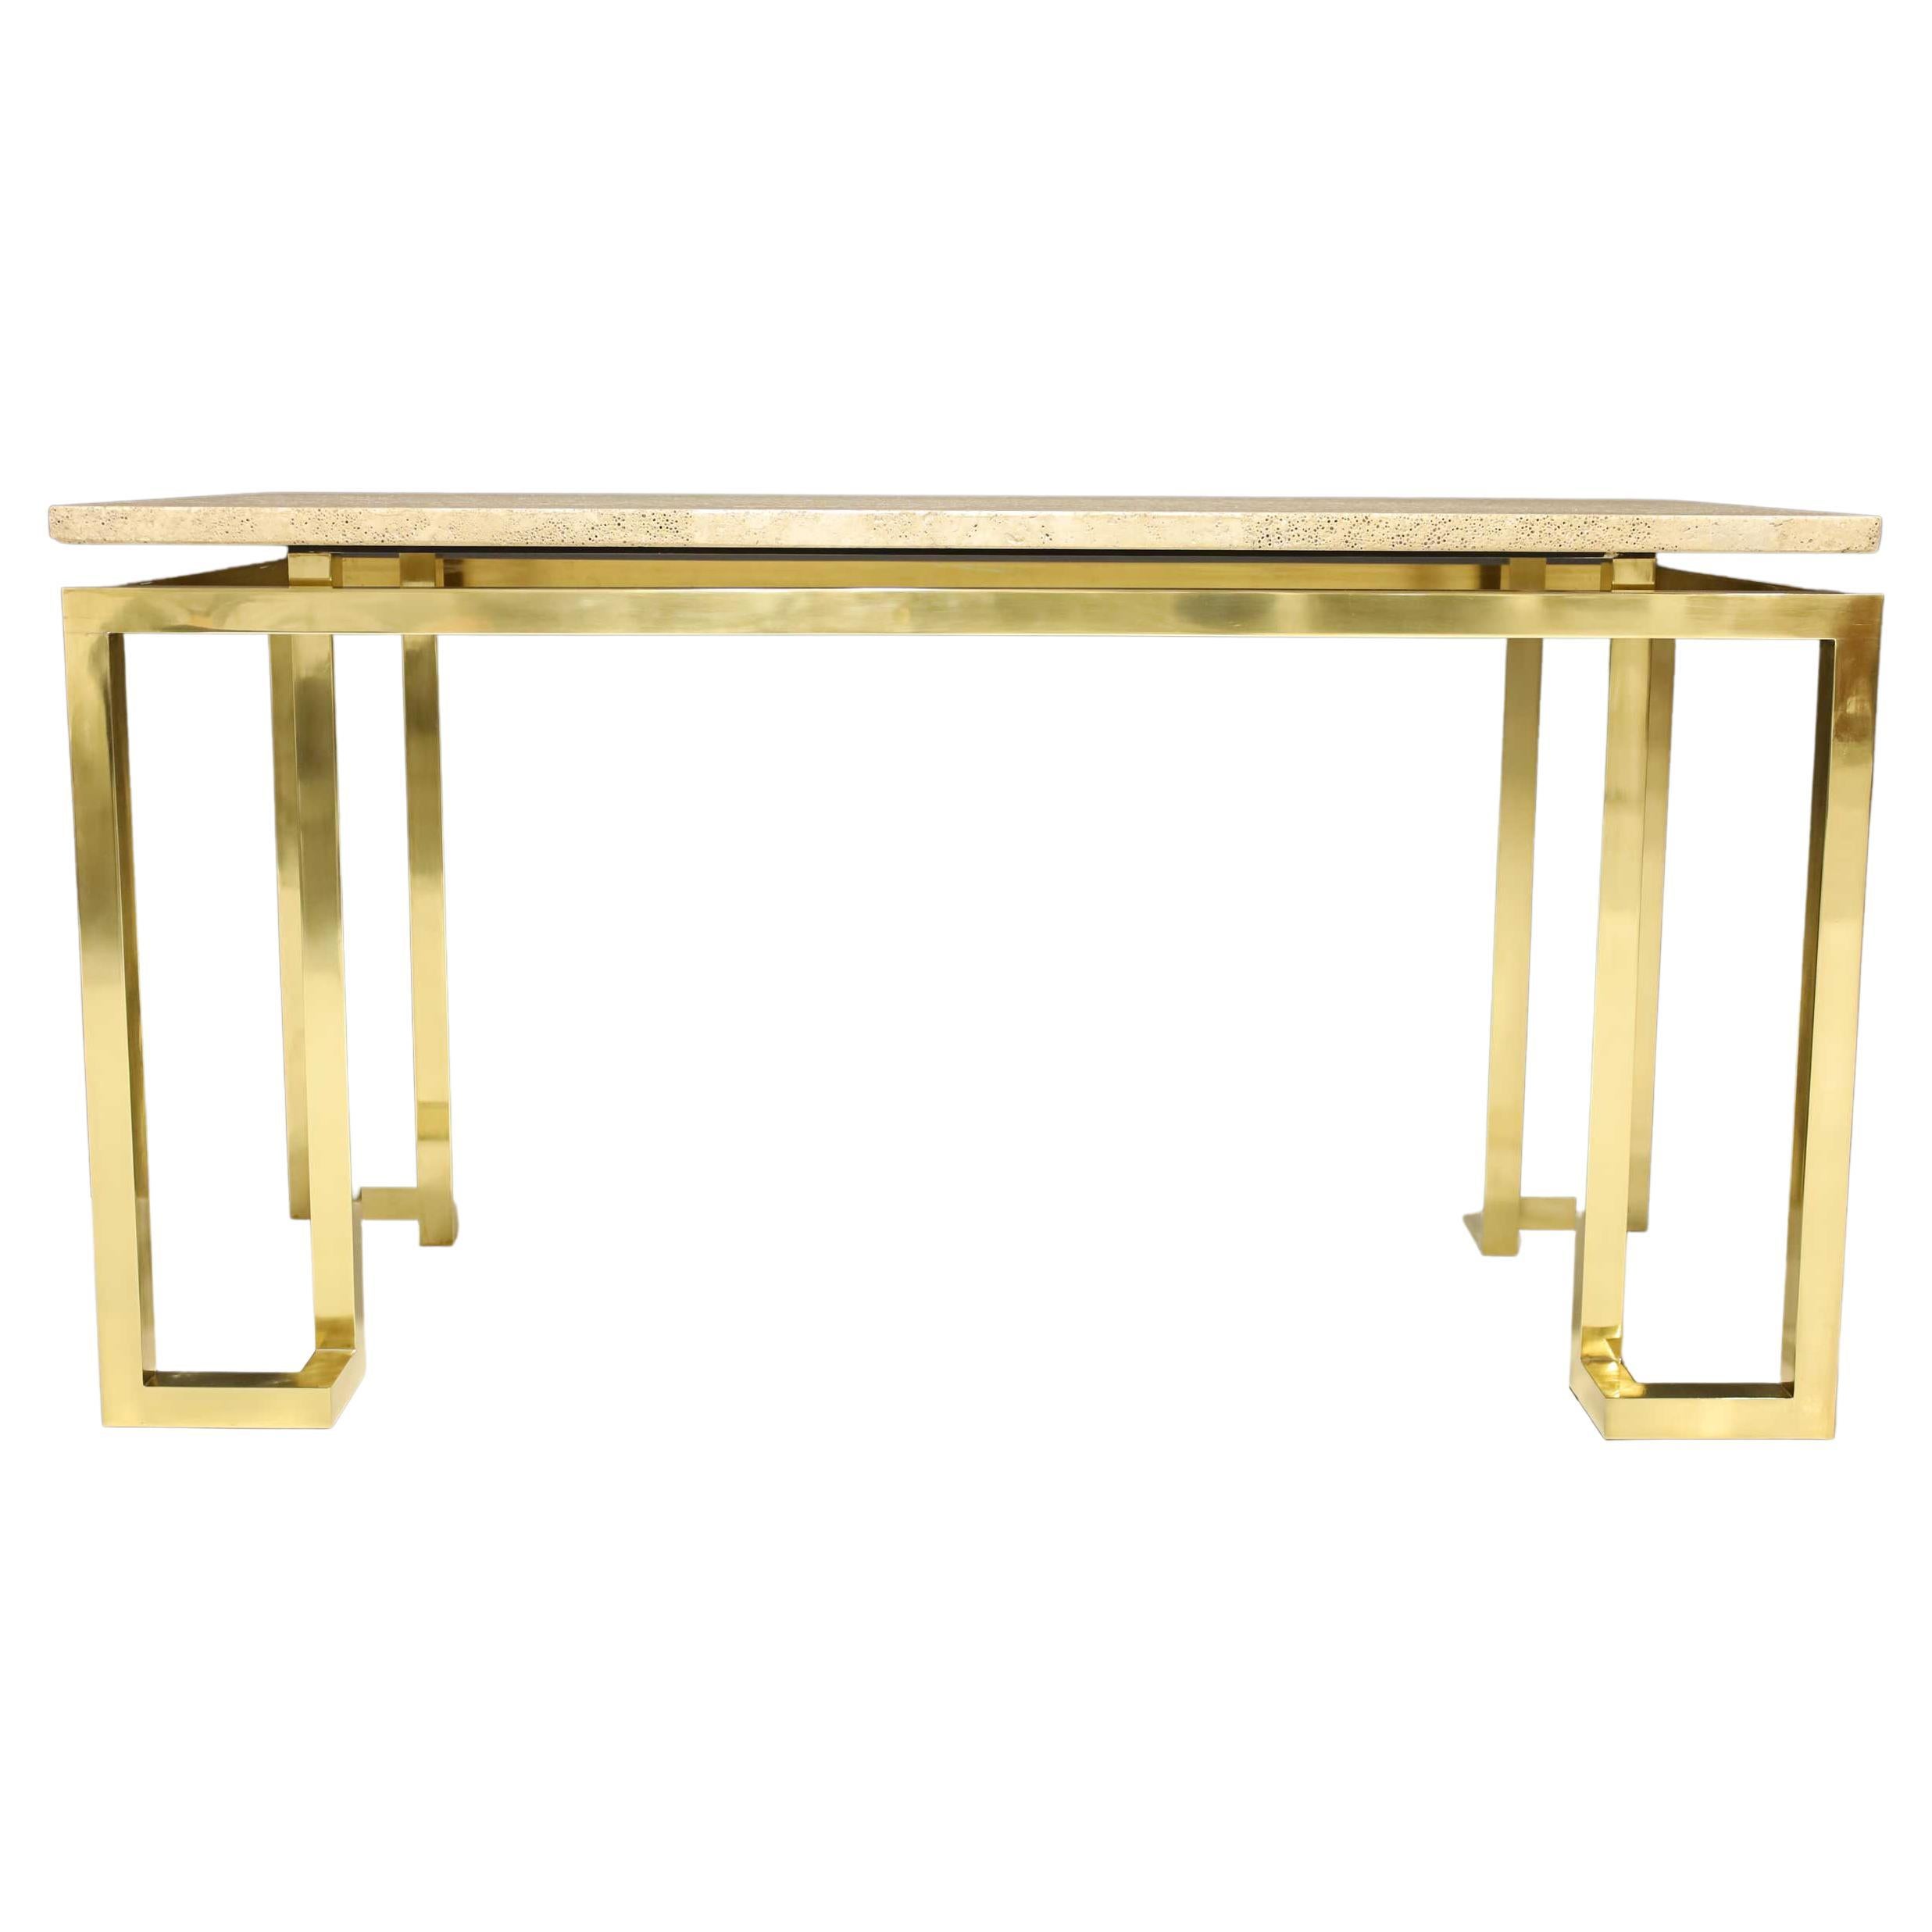 Paul M. Jones Brass and Travertine Console Table For Sale